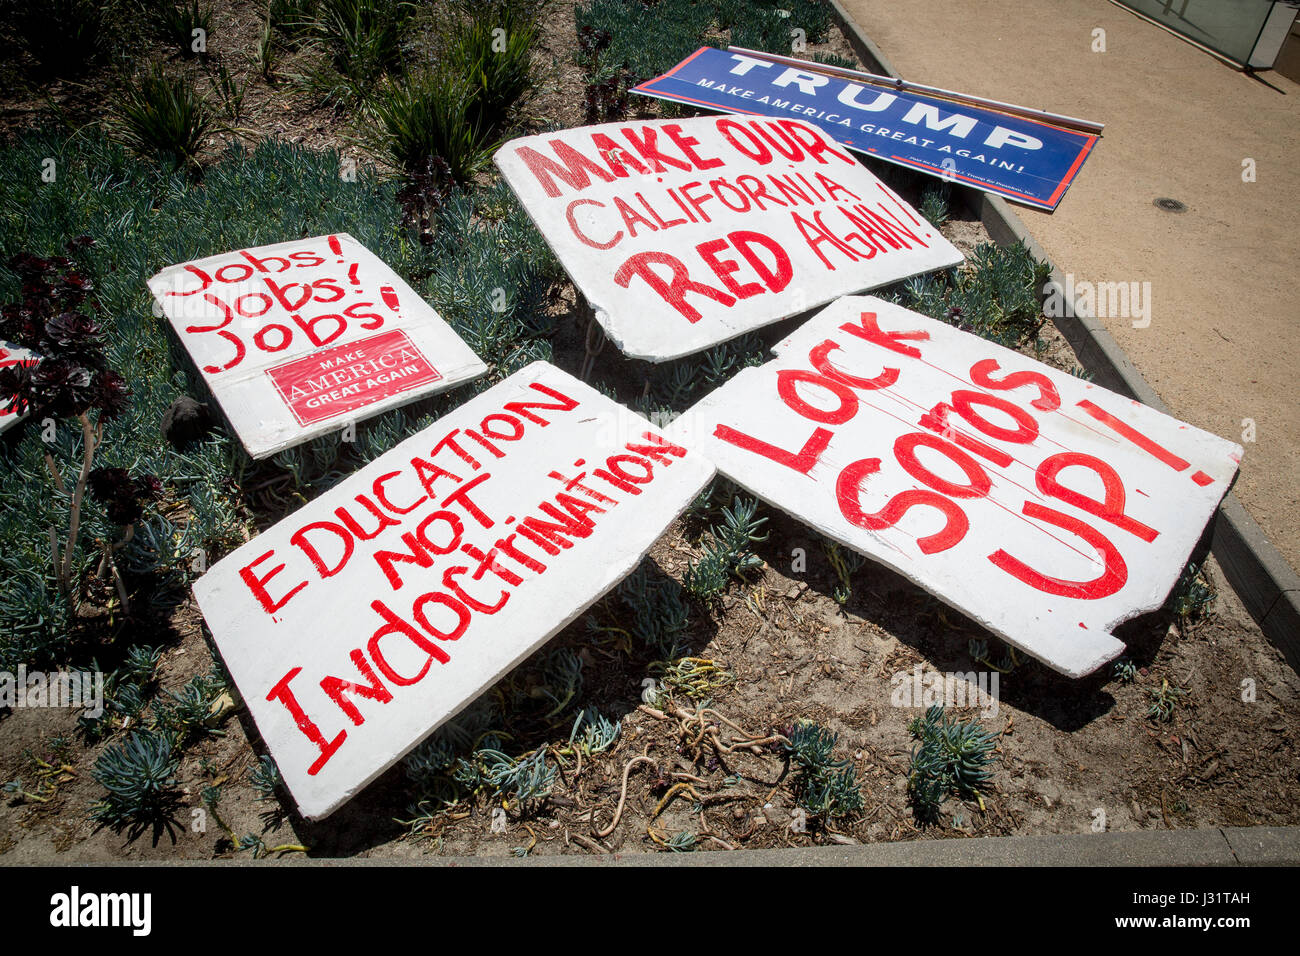 Los Angeles, USA. 1st May, 2017. A selection of protest signs from pro-Trump counter-protesters at May Day rally in Downtown Los Angeles, California, May 1st, 2017. Credit: Jim Newberry/Alamy Live News Stock Photo